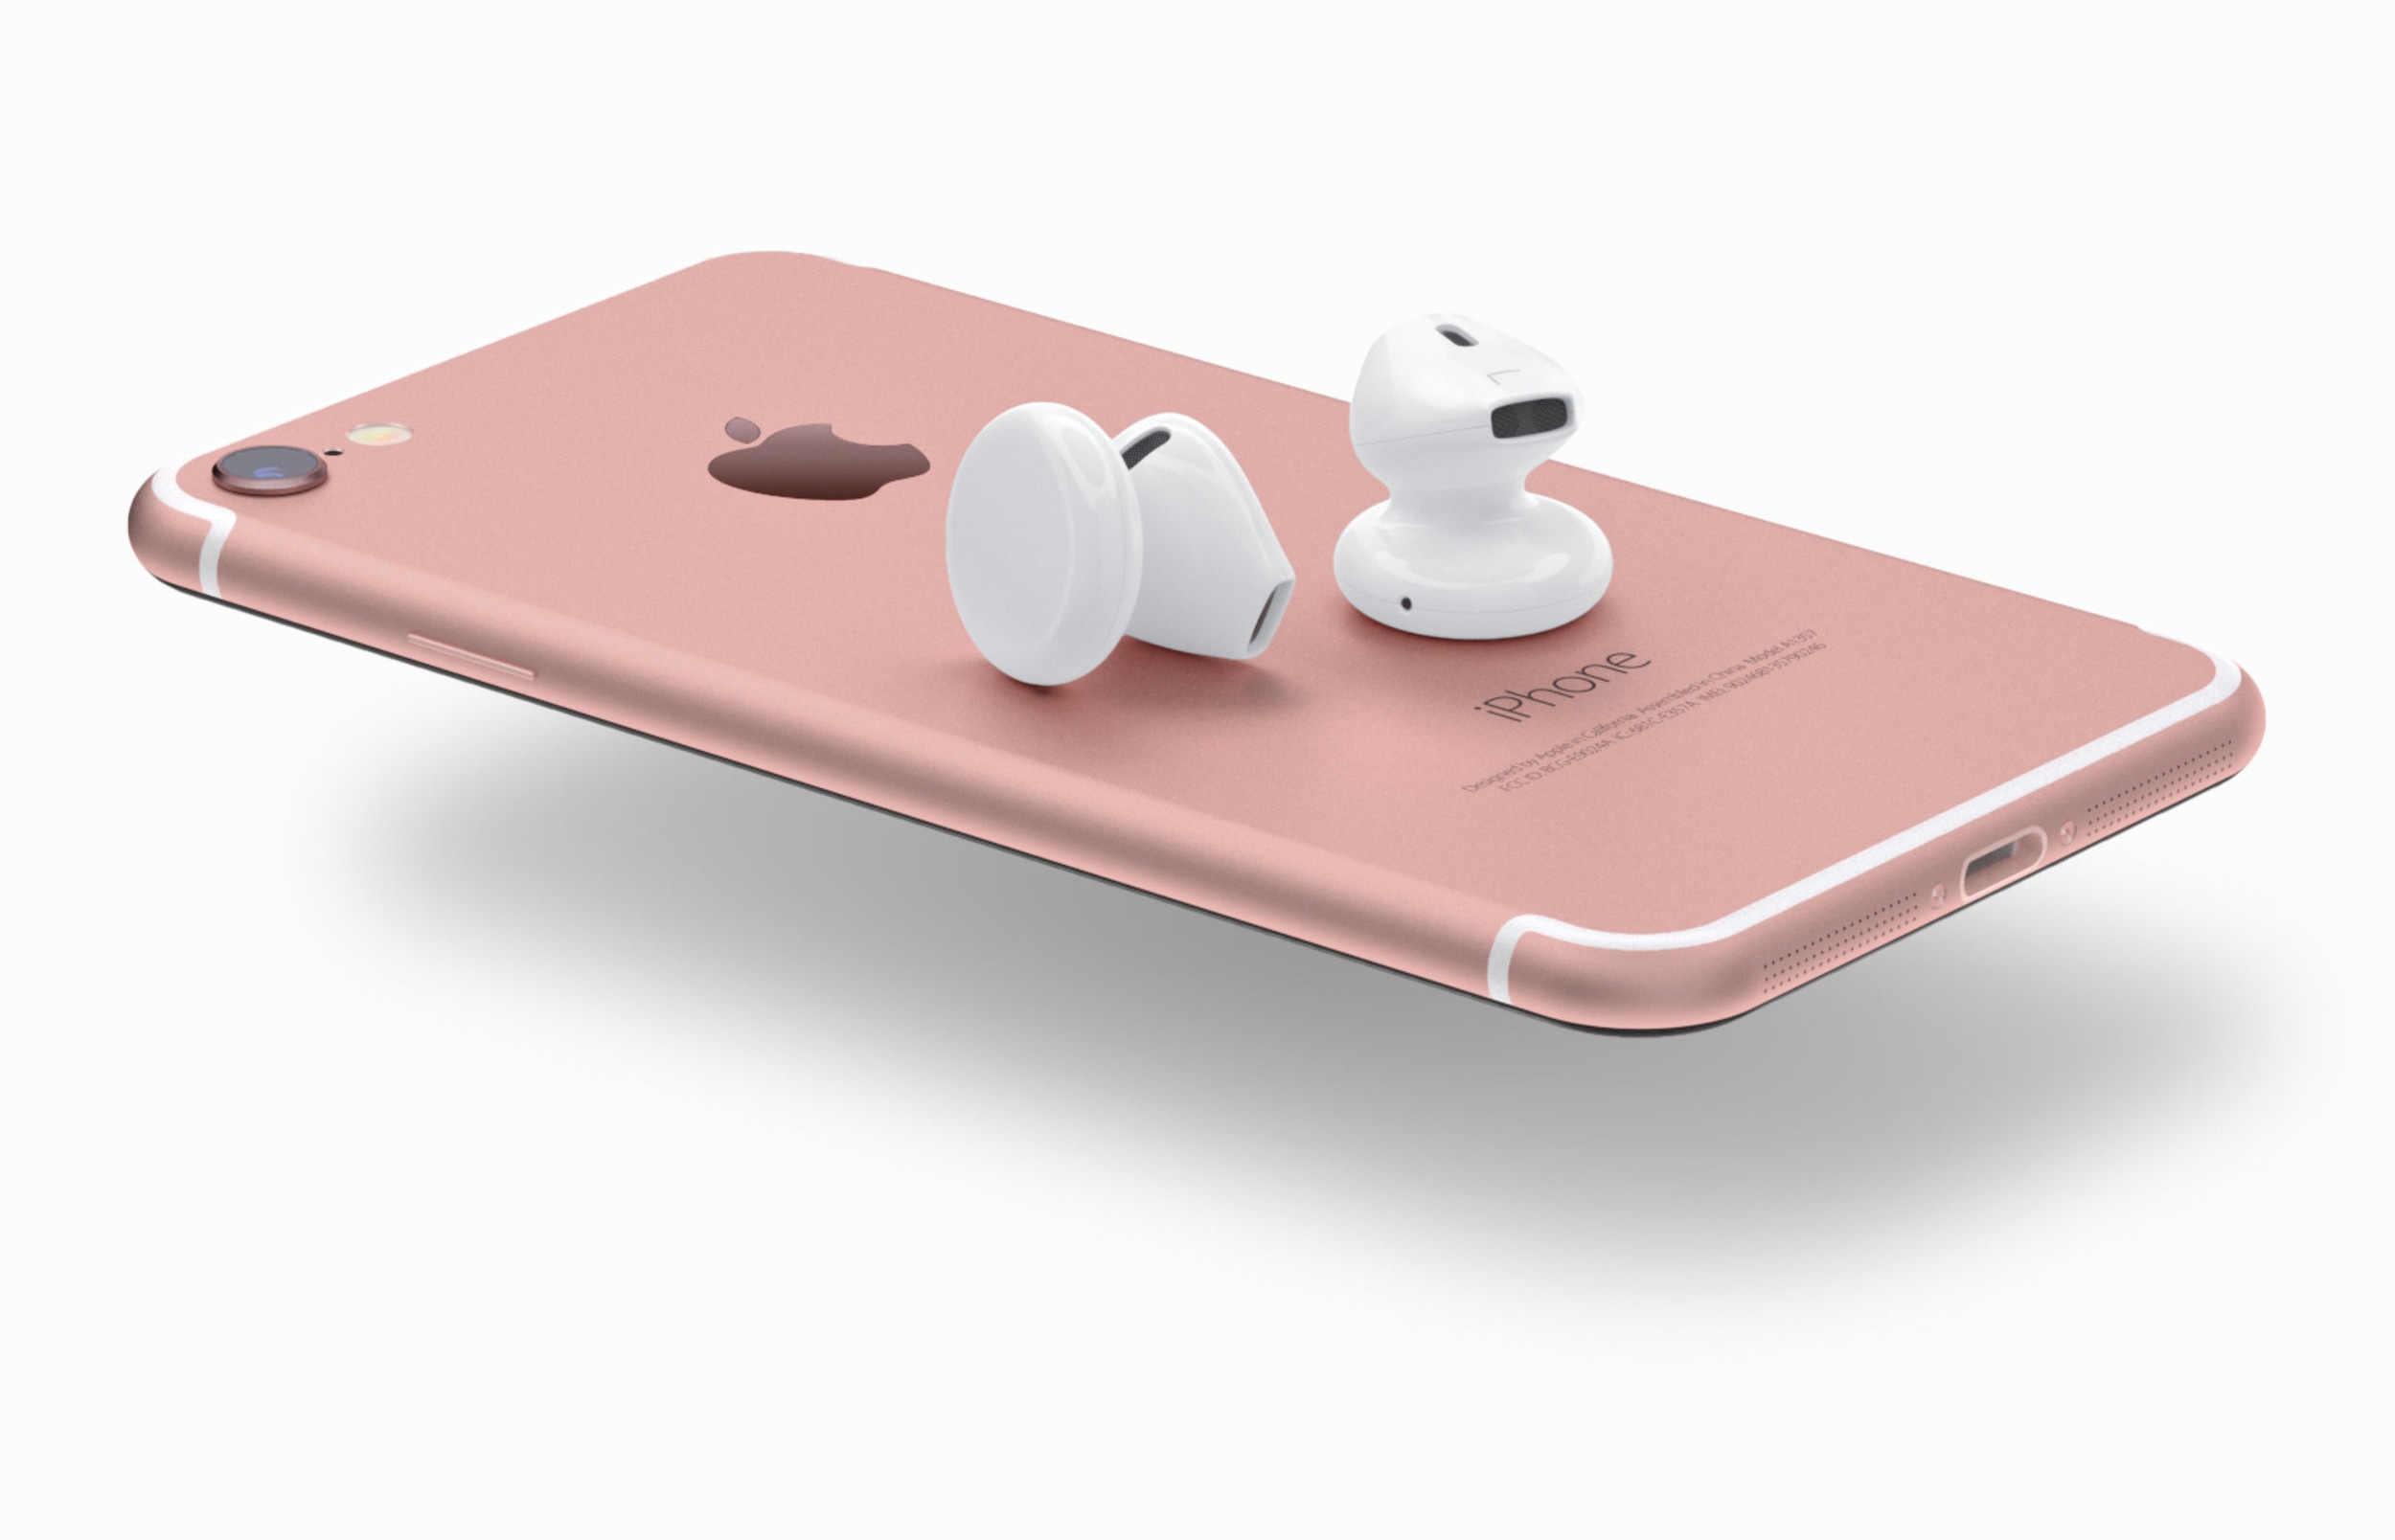 “AirPods”, “Smart Button”, “Touch Bar” and more: Apple's new trademark registrations suggest future products and technologies